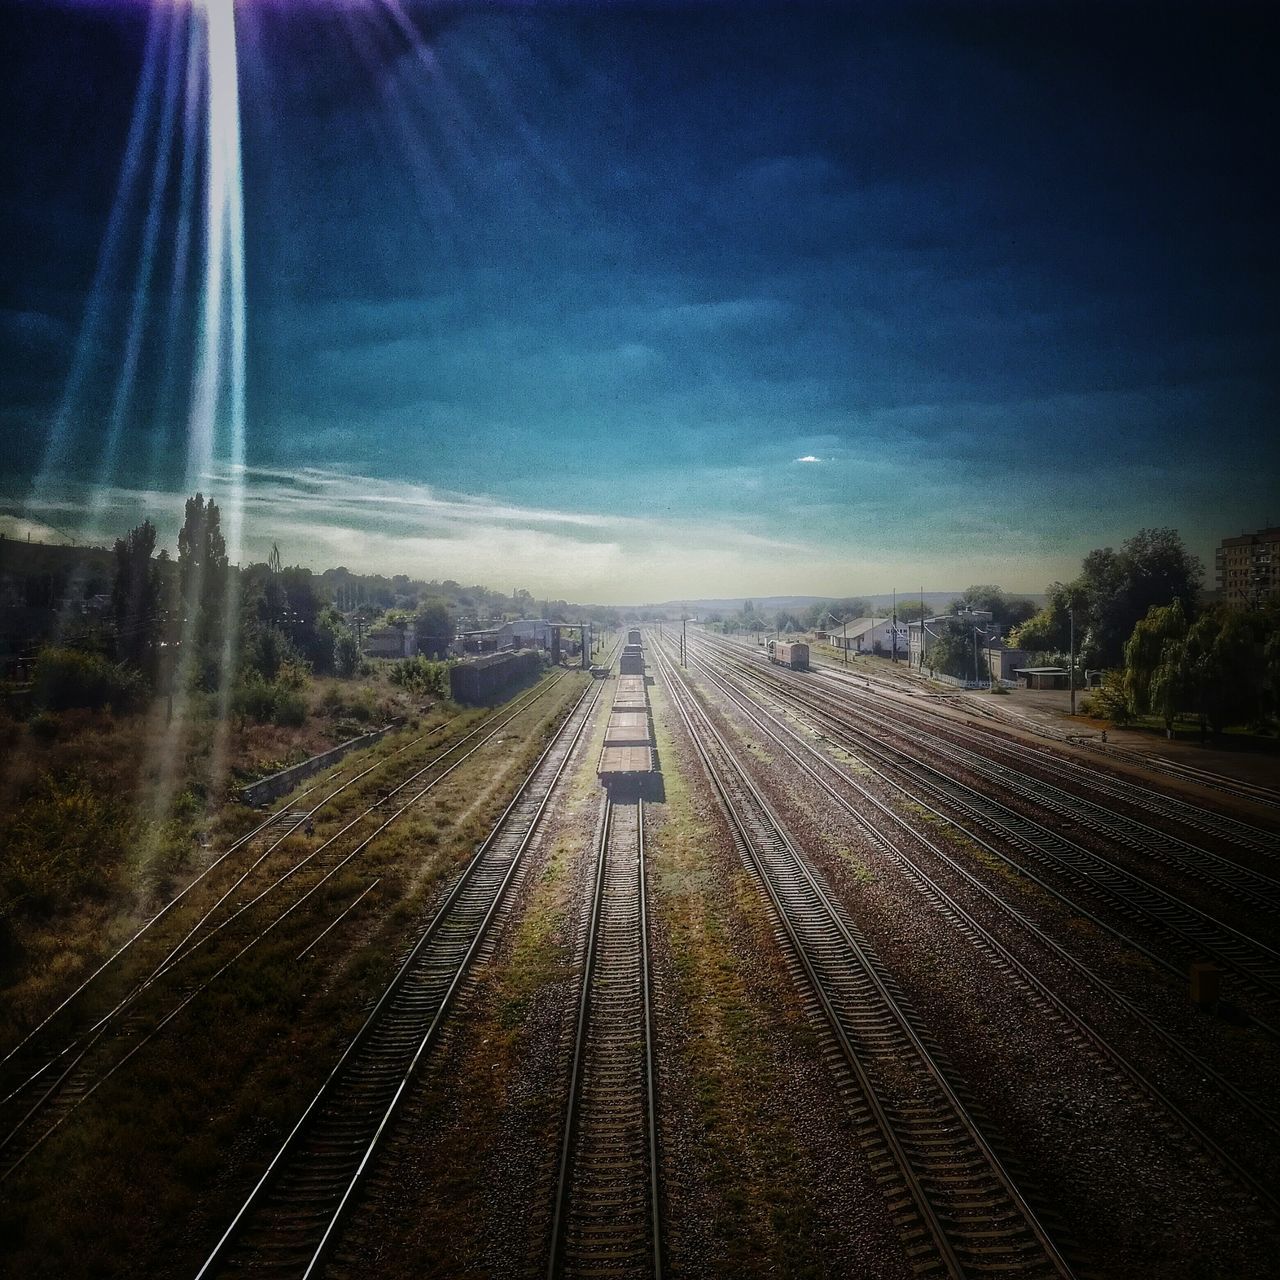 railroad track, transportation, mode of transport, rail transportation, sky, train - vehicle, travel, the way forward, straight, vanishing point, outdoors, scenics, nature, diminishing perspective, day, journey, non-urban scene, no people, beauty in nature